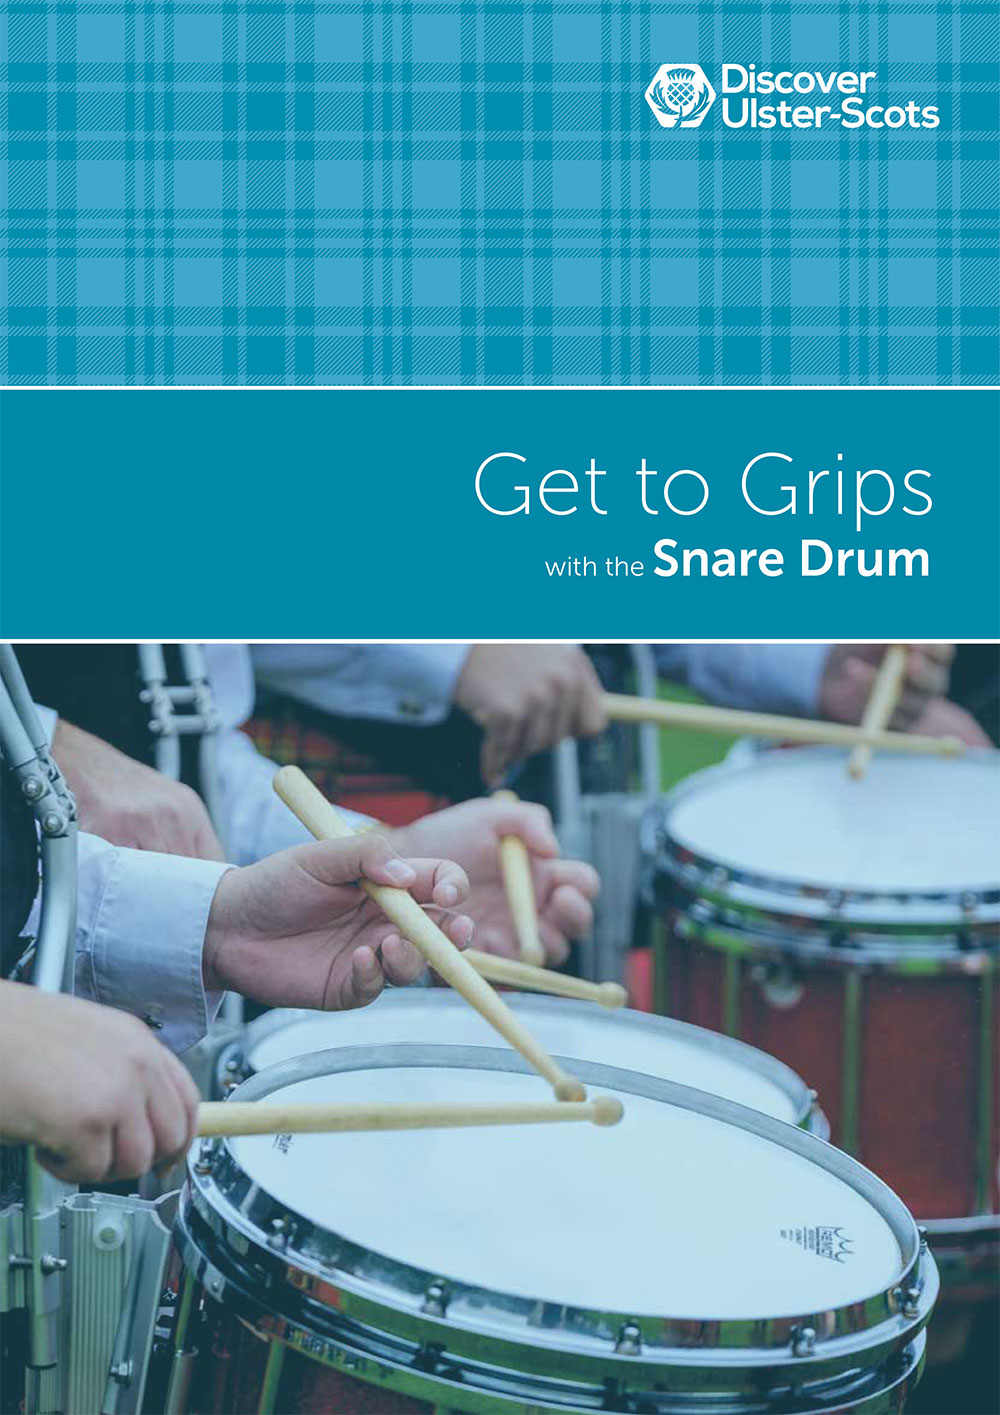 Get to Grips with the Snare Drum